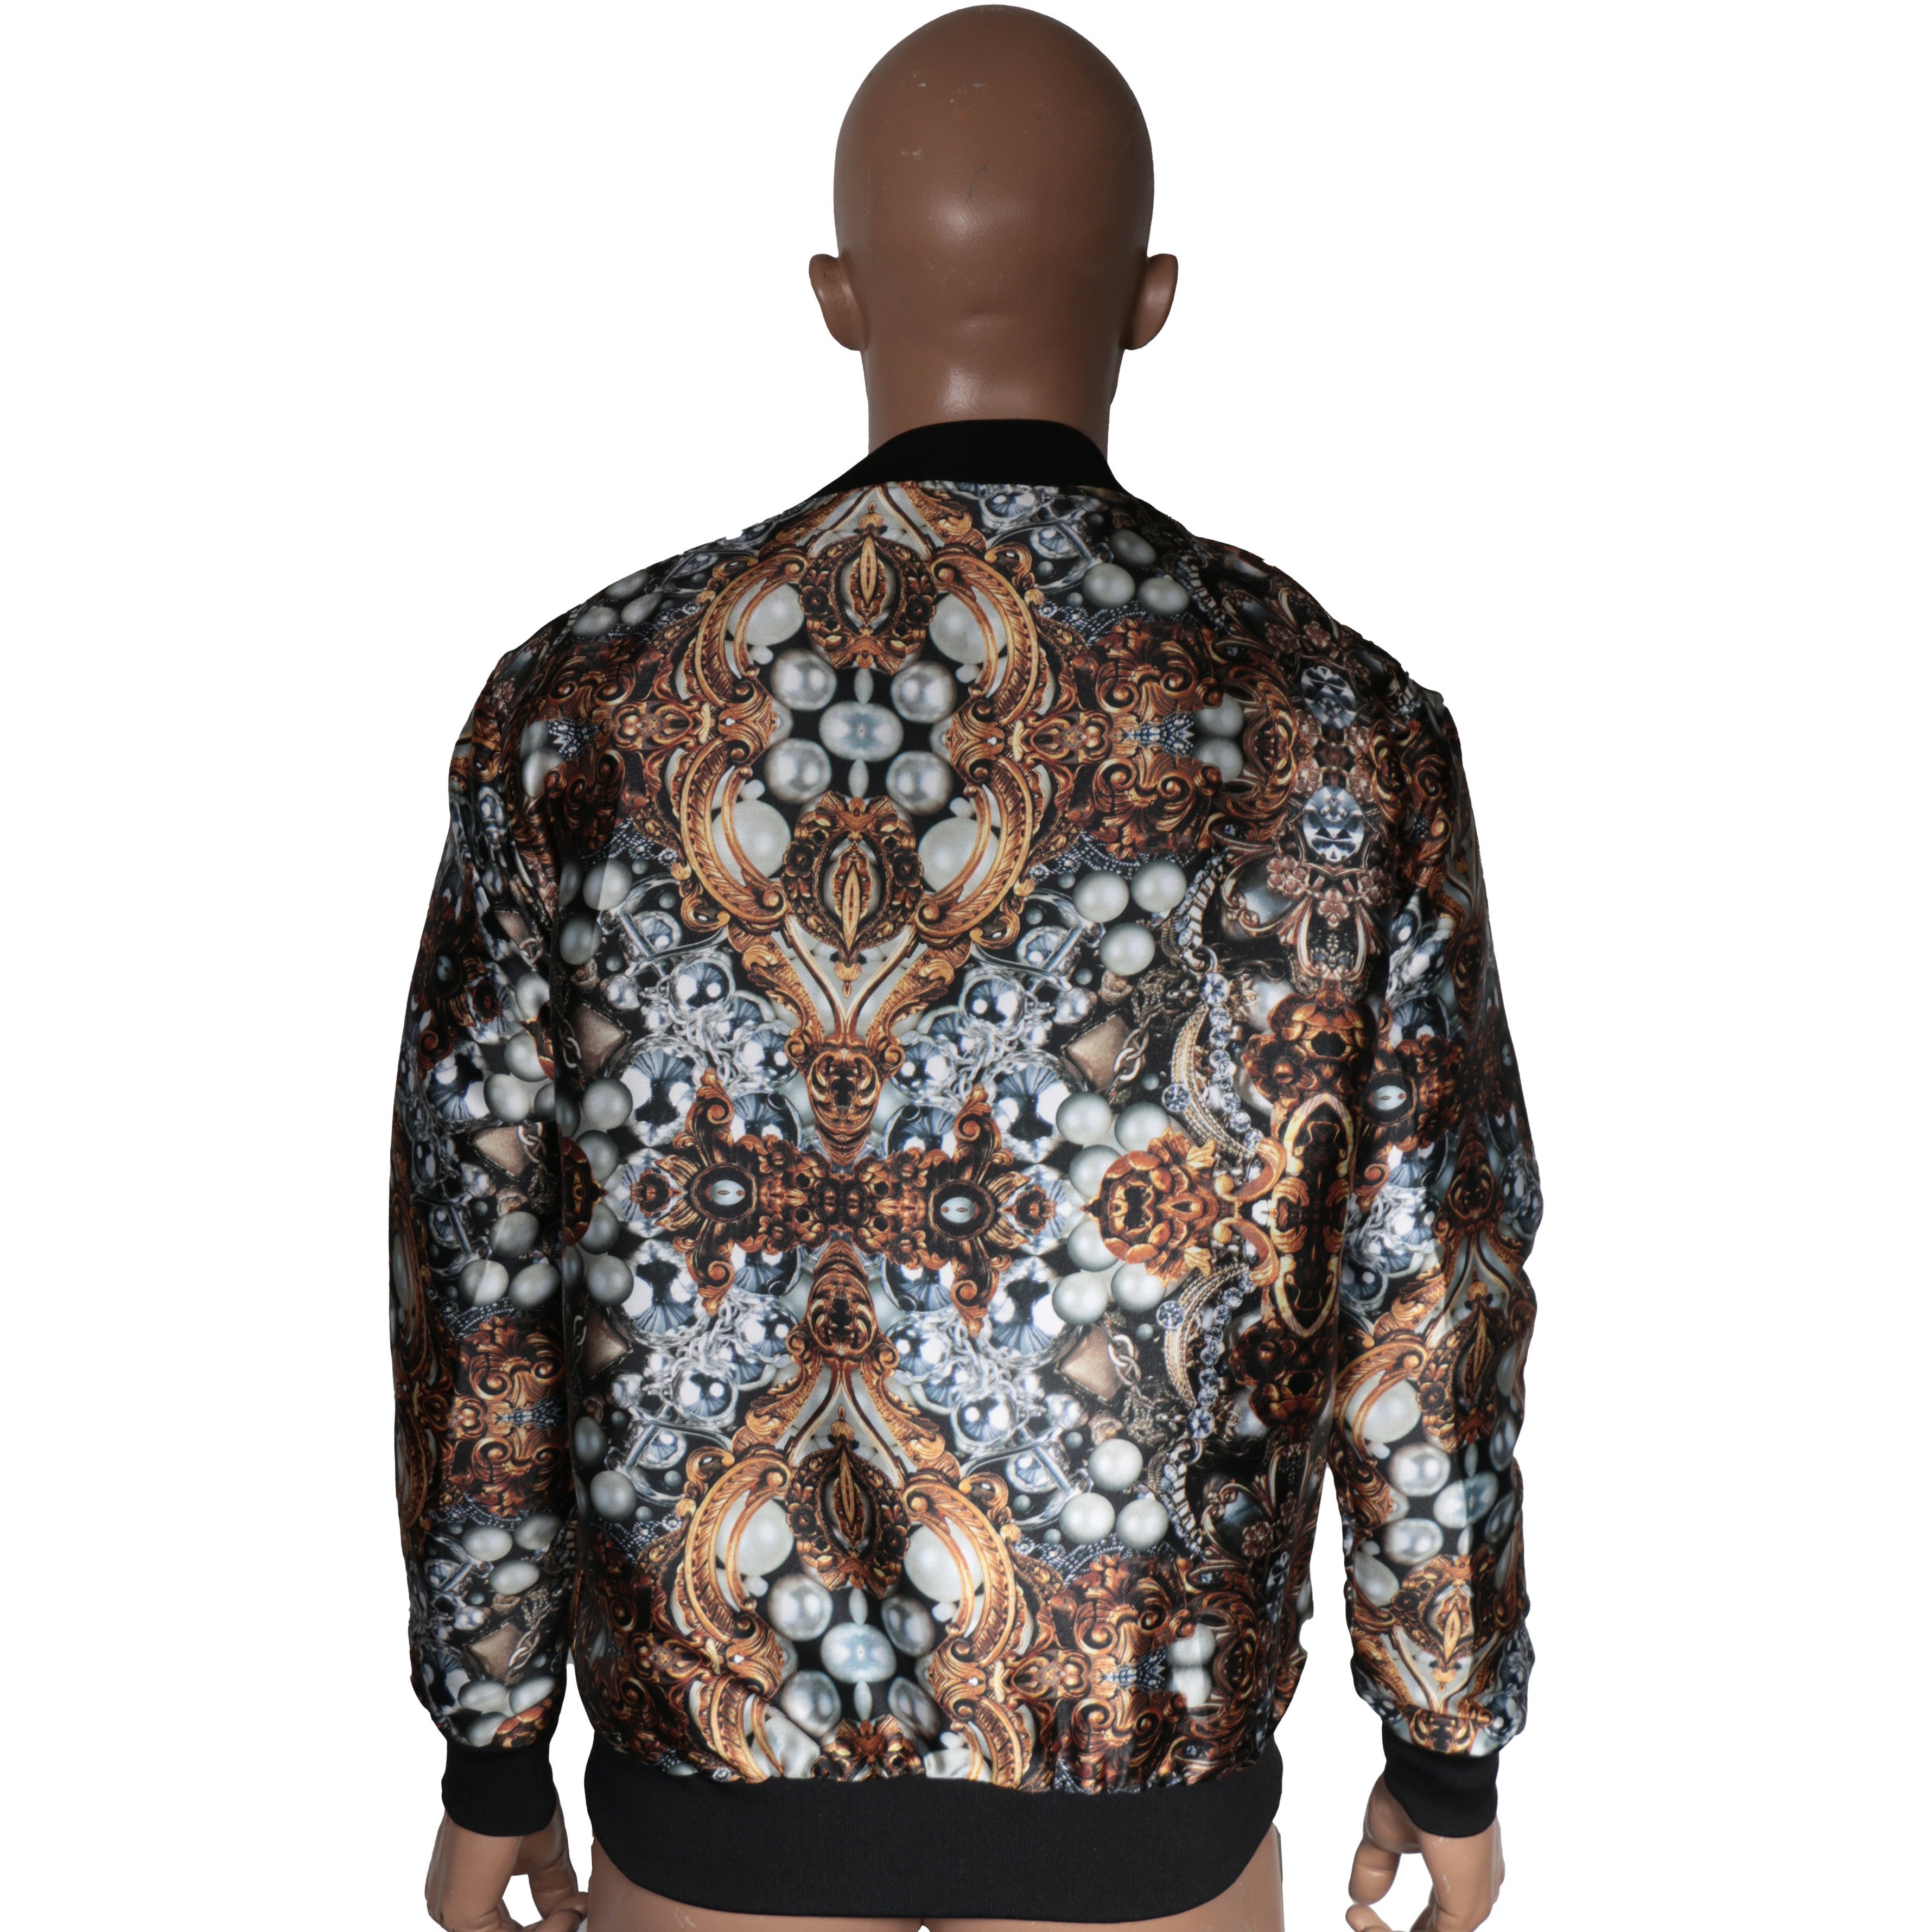 Bomber Jacket with abstract prints